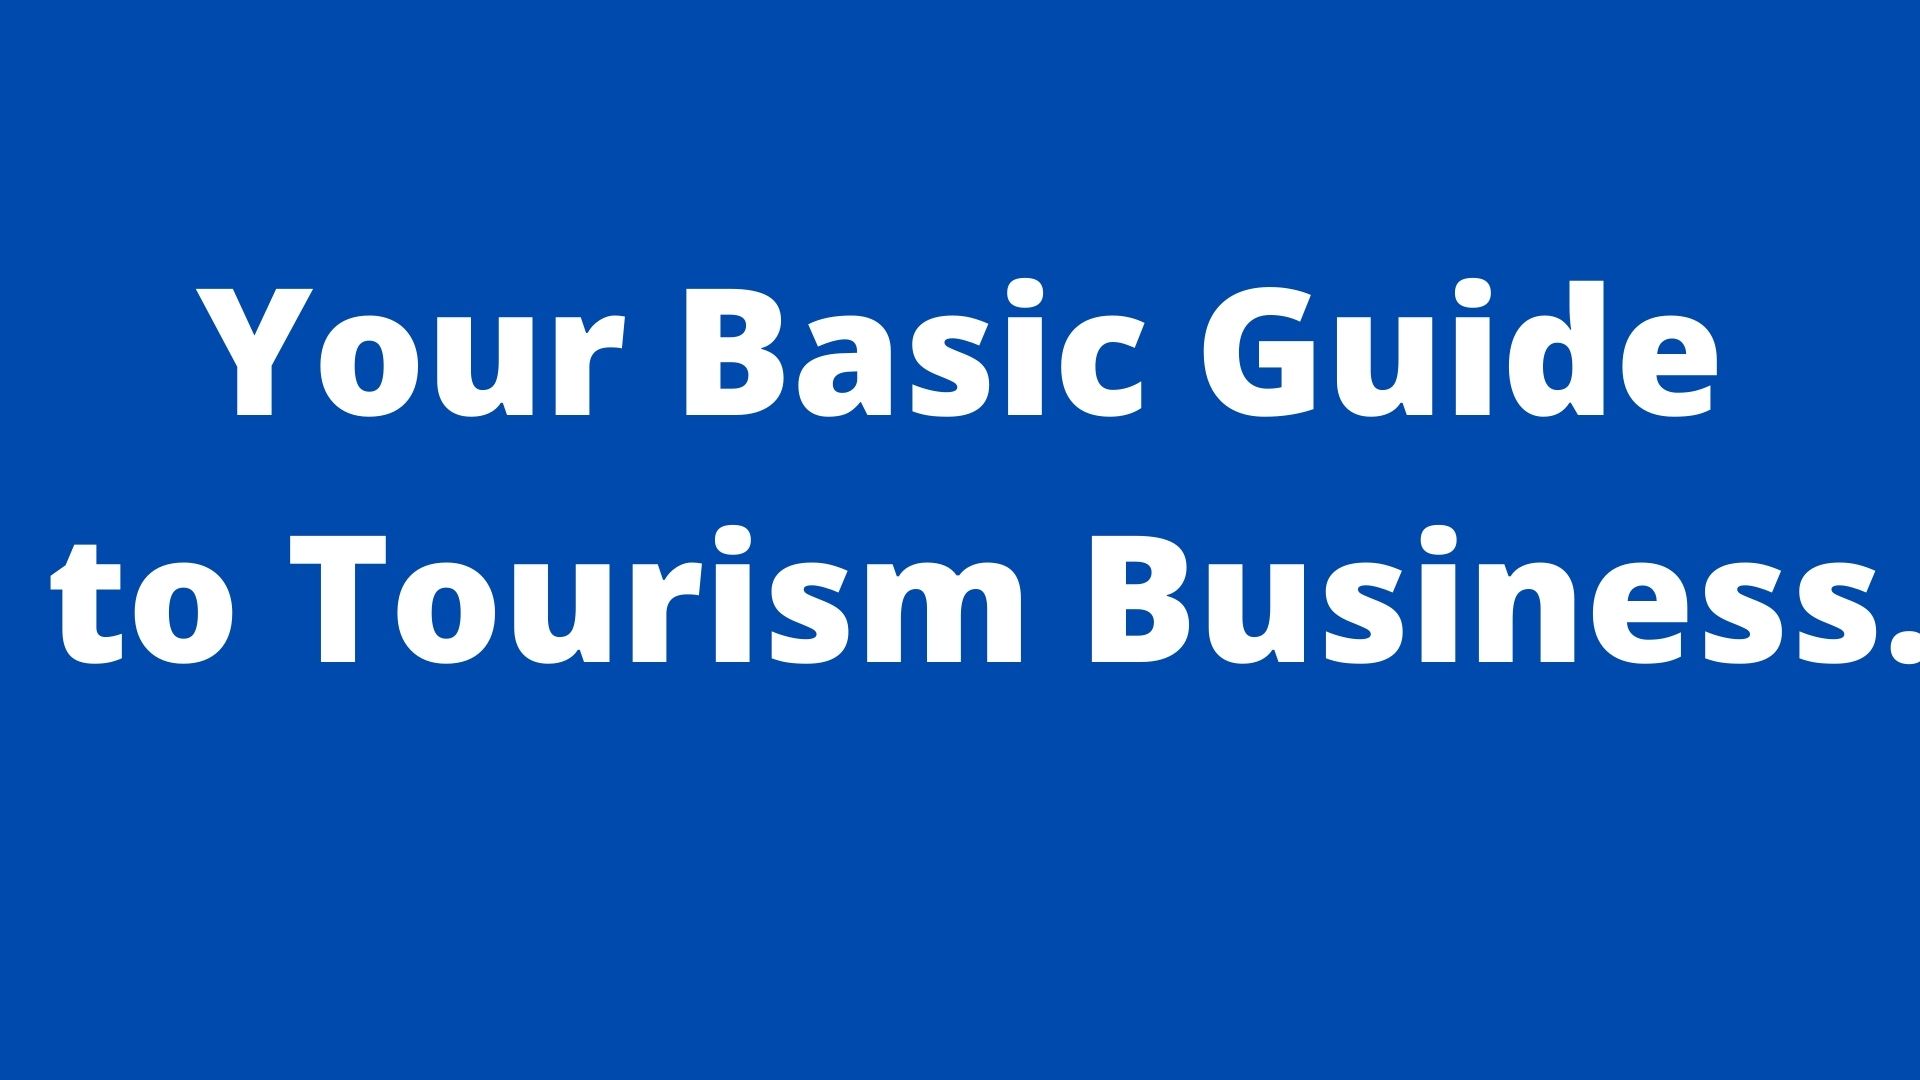 An Entrepreneur’s Guide To Tourism Business